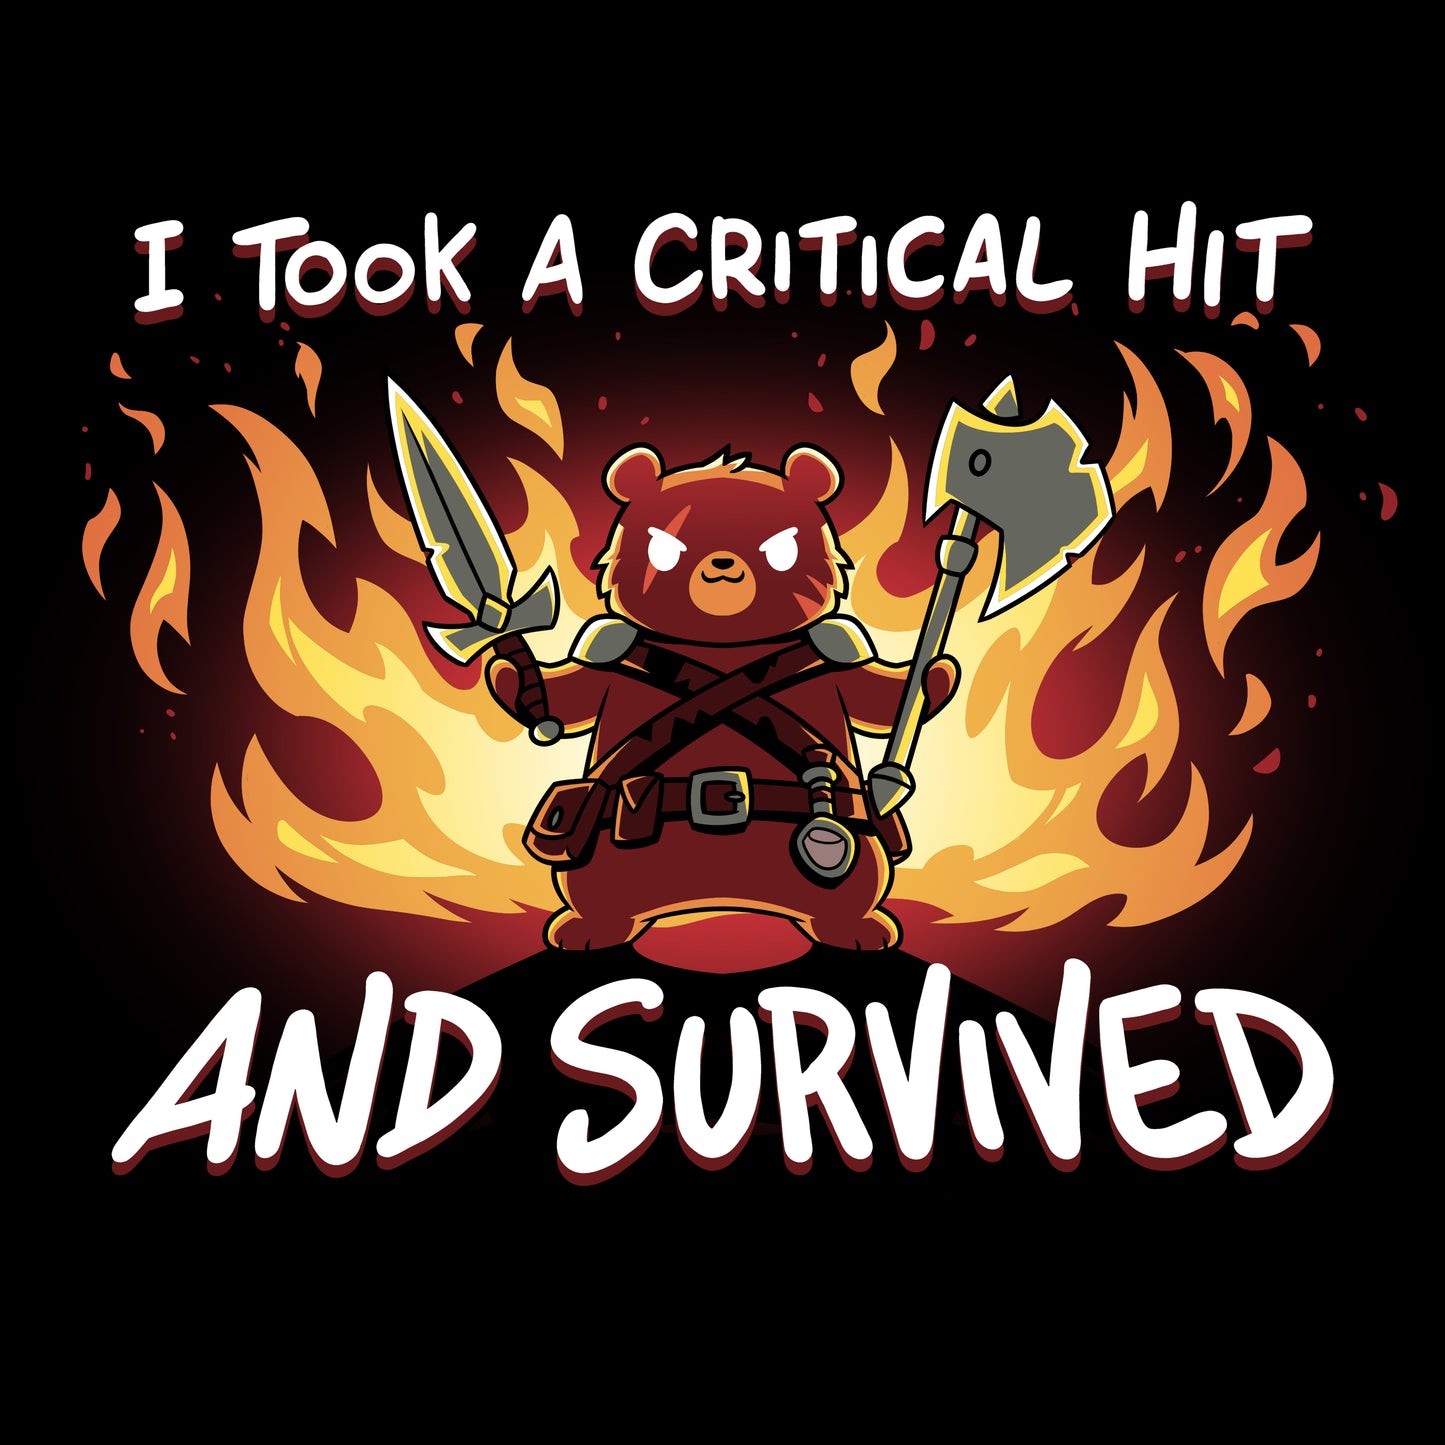 I survived a critical hit with the product "I Took A Critical Hit and Survived" from the brand TeeTurtle.